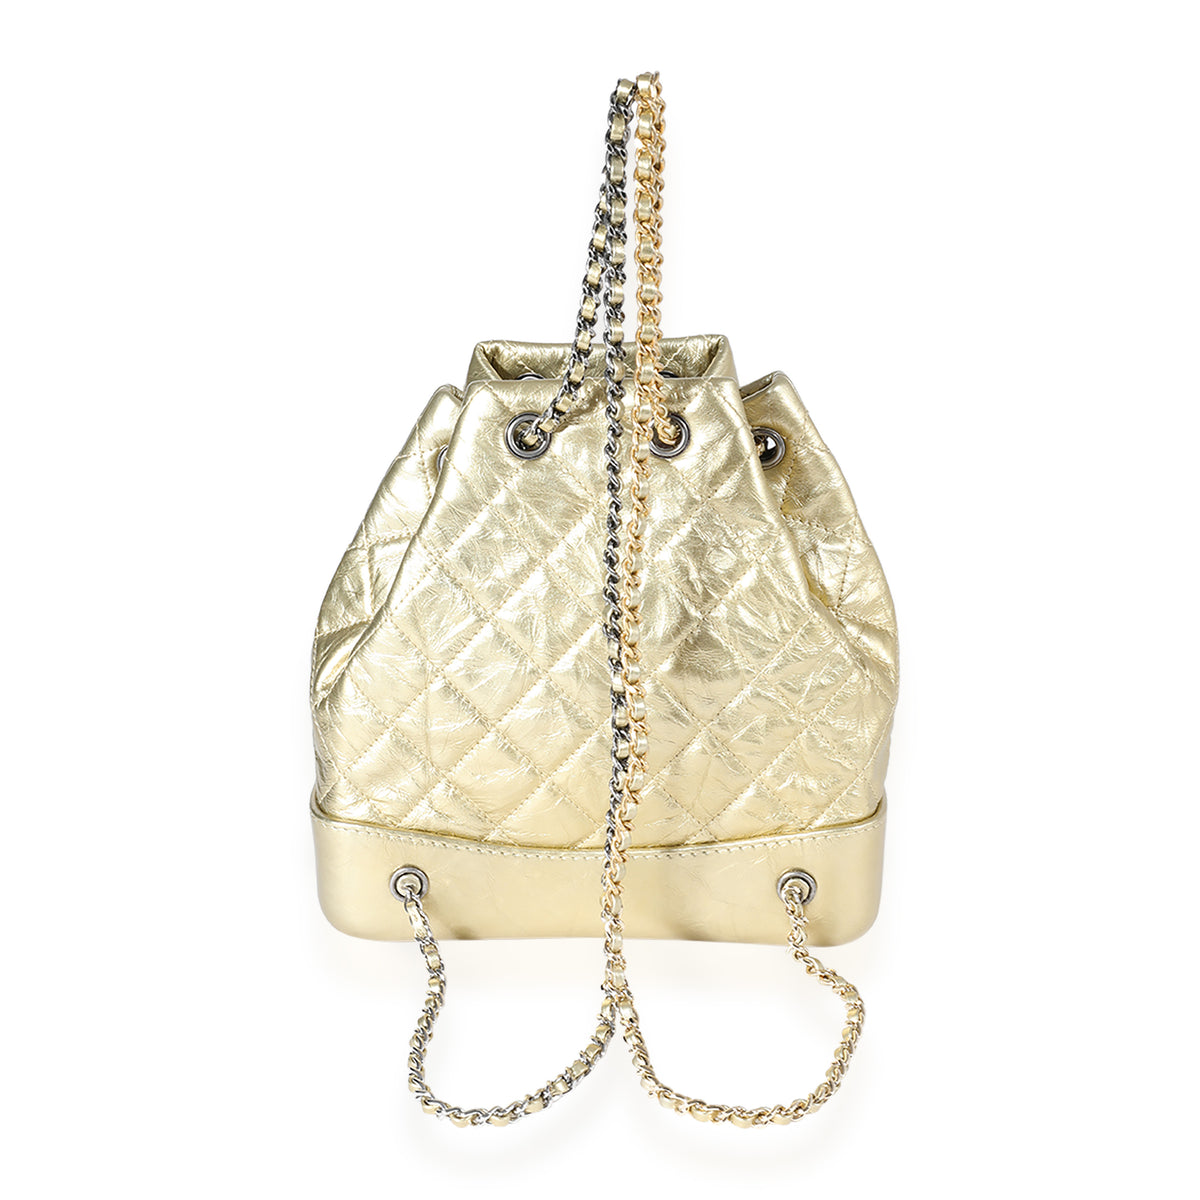 Chanel Metallic Gold Quilted Calfskin Small Gabrielle Backpack, myGemma